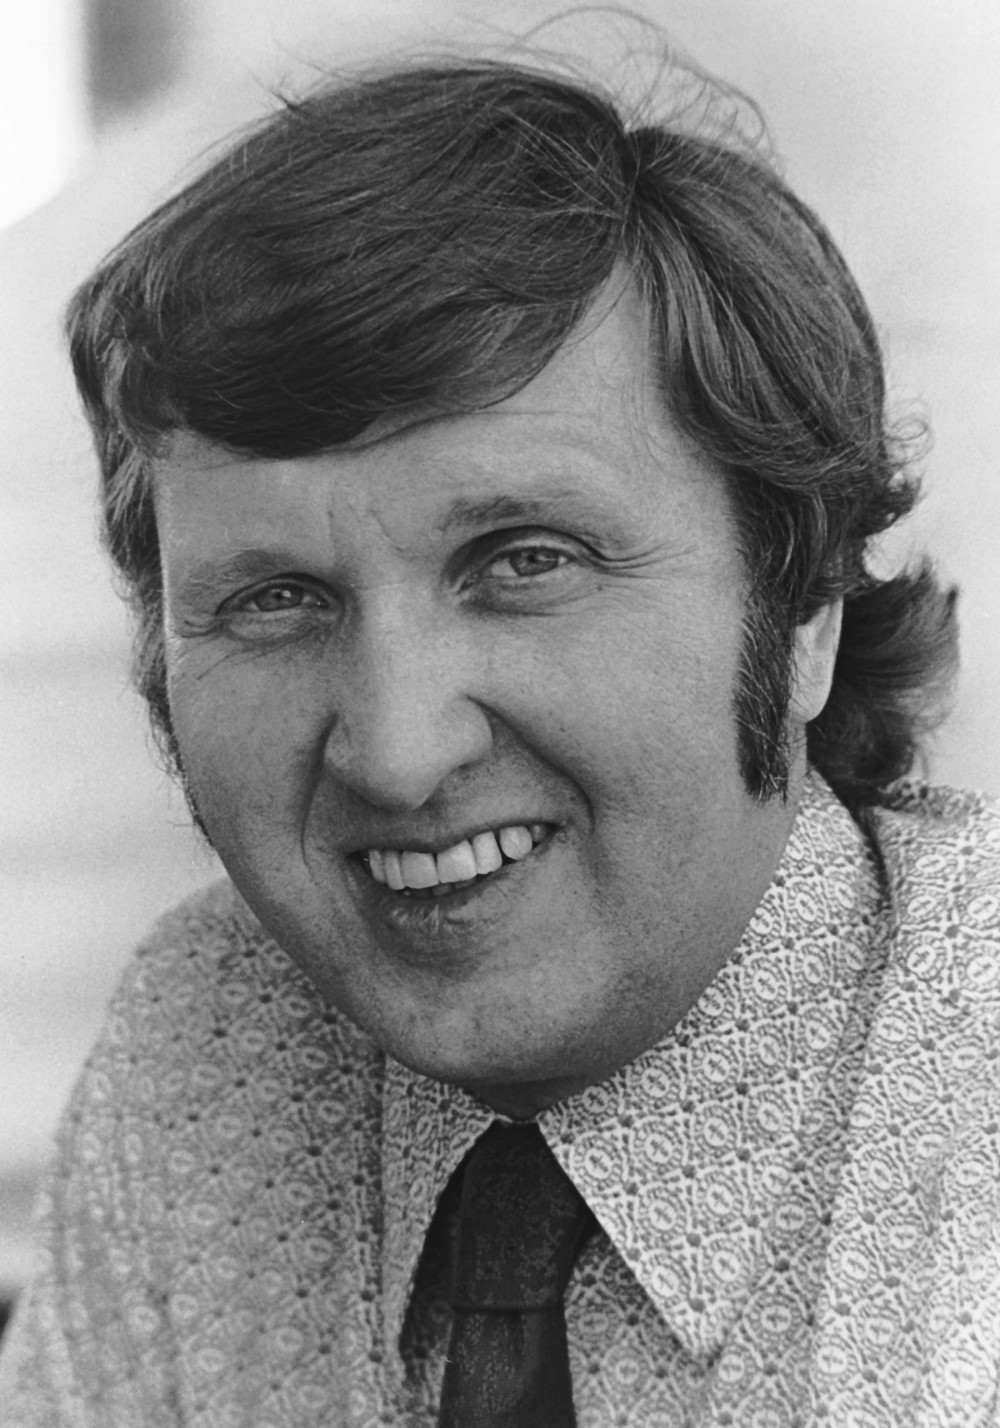 Noted broadcaster Ken Squier was the lap-by-lap voice of the Daytona 500 on CBS-TV from 1979 through 1997. He also called the first race ever aired by MRN in 1970. Squier coined the name ñThe Great American Raceî for the Daytona 500 and developed the in-car camera that was first used in 1982. (Photo by ISC Archives via Getty Images)